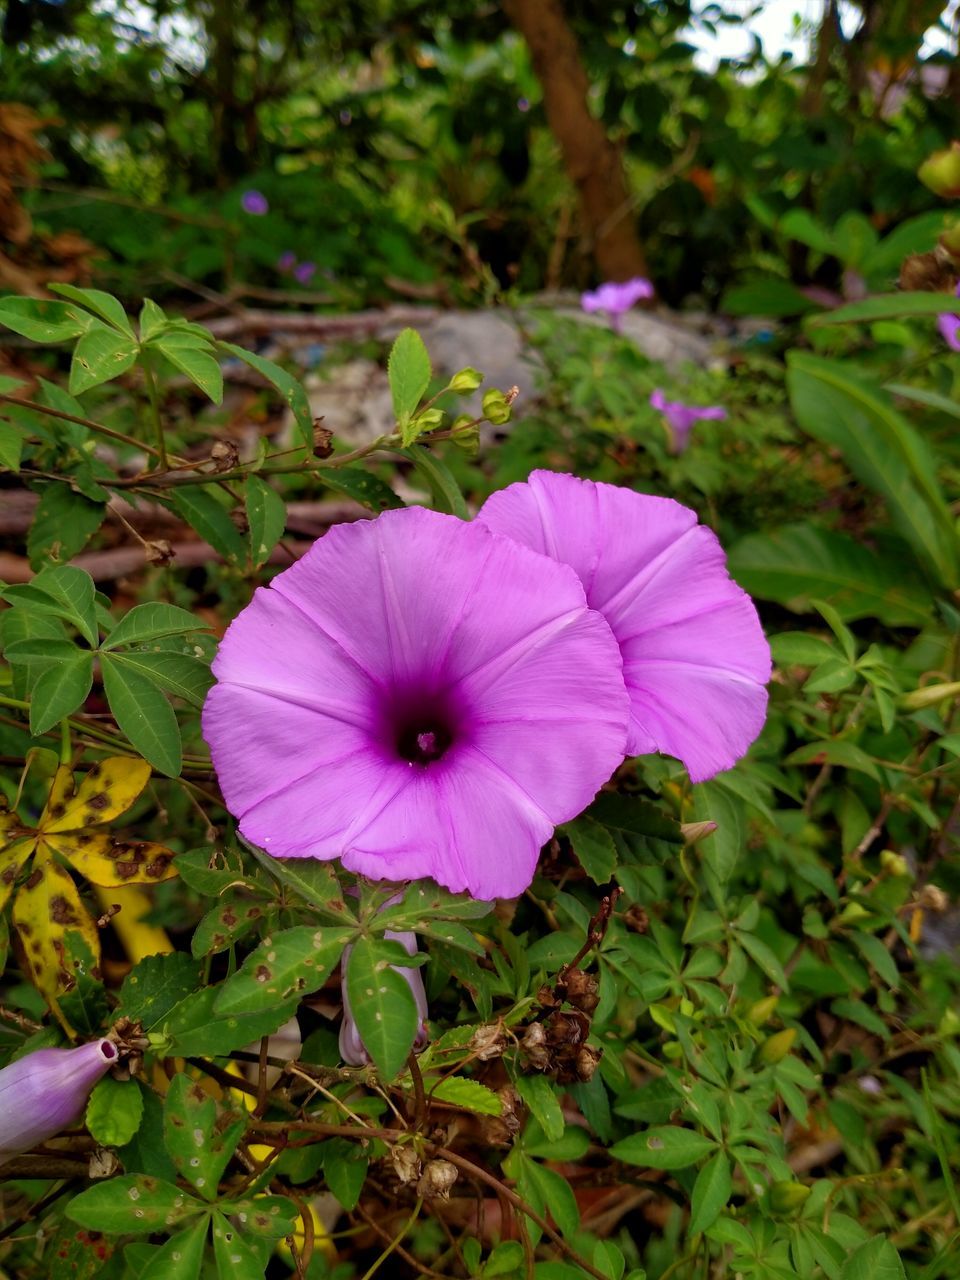 plant, flower, flowering plant, freshness, beauty in nature, growth, nature, close-up, petal, fragility, inflorescence, purple, flower head, pink, wildflower, no people, morning glory, leaf, plant part, garden, green, day, focus on foreground, outdoors, petunia